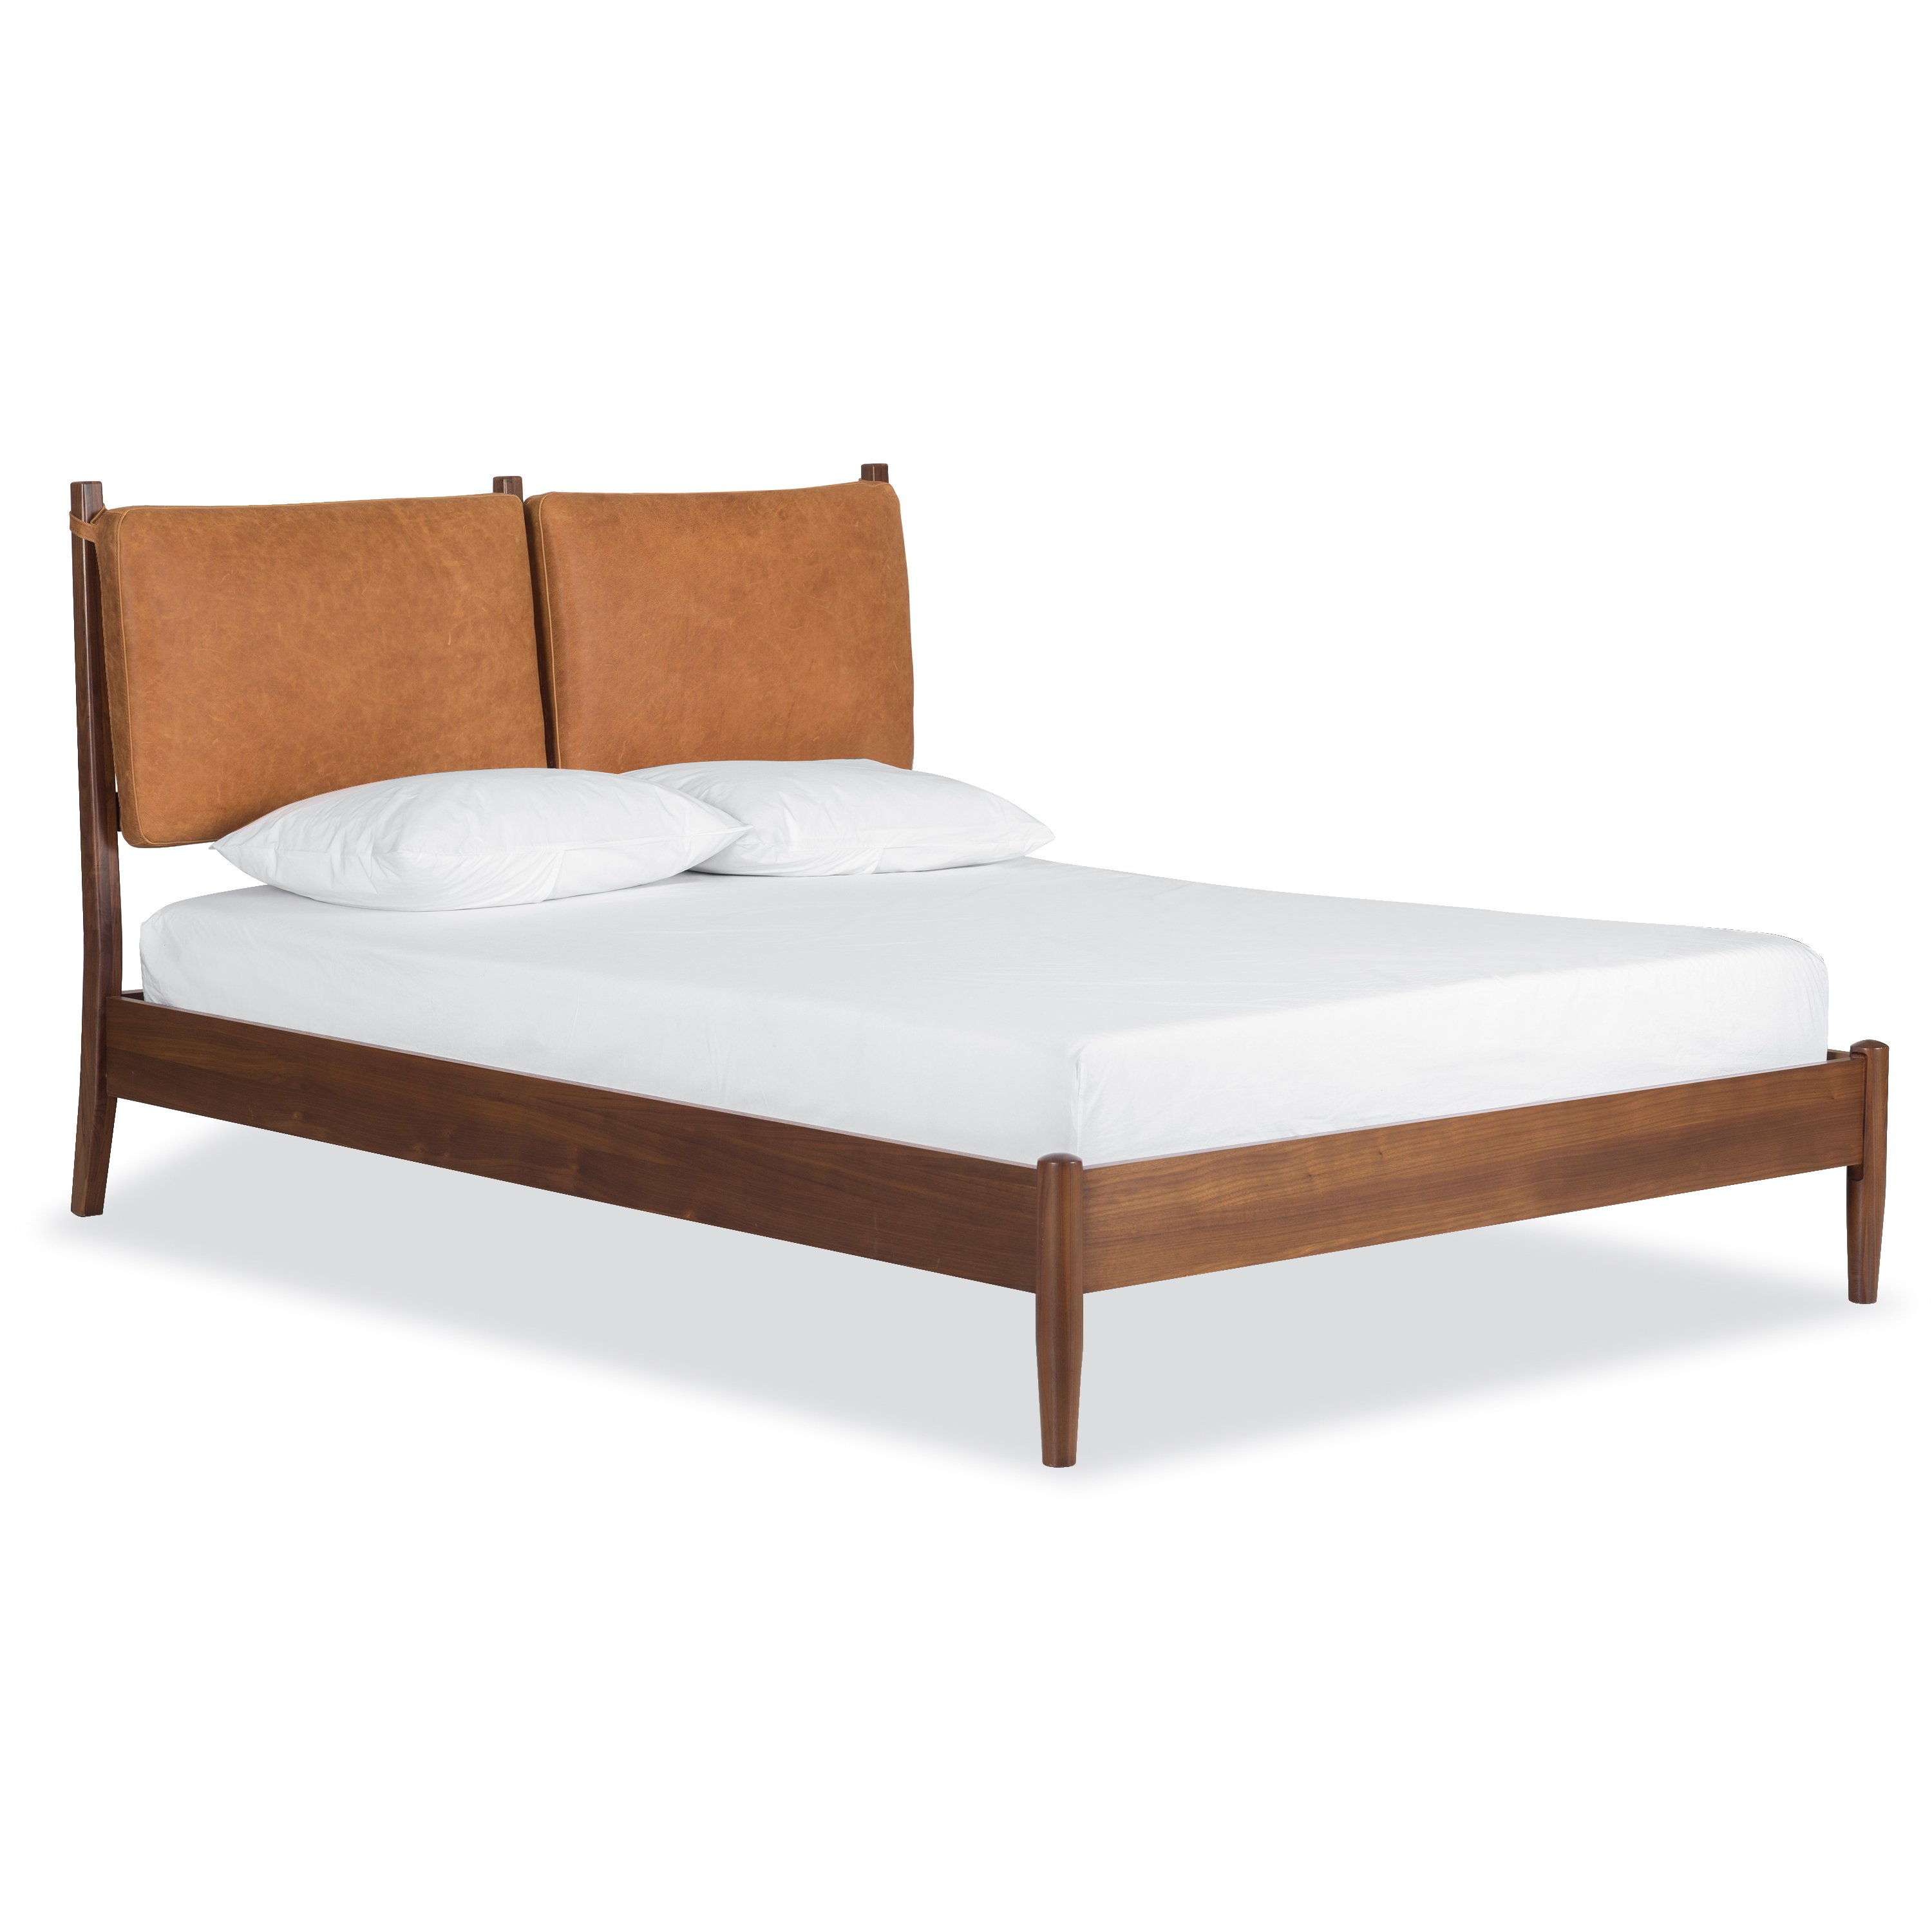 Image of Truro Bed with Leather Cushions